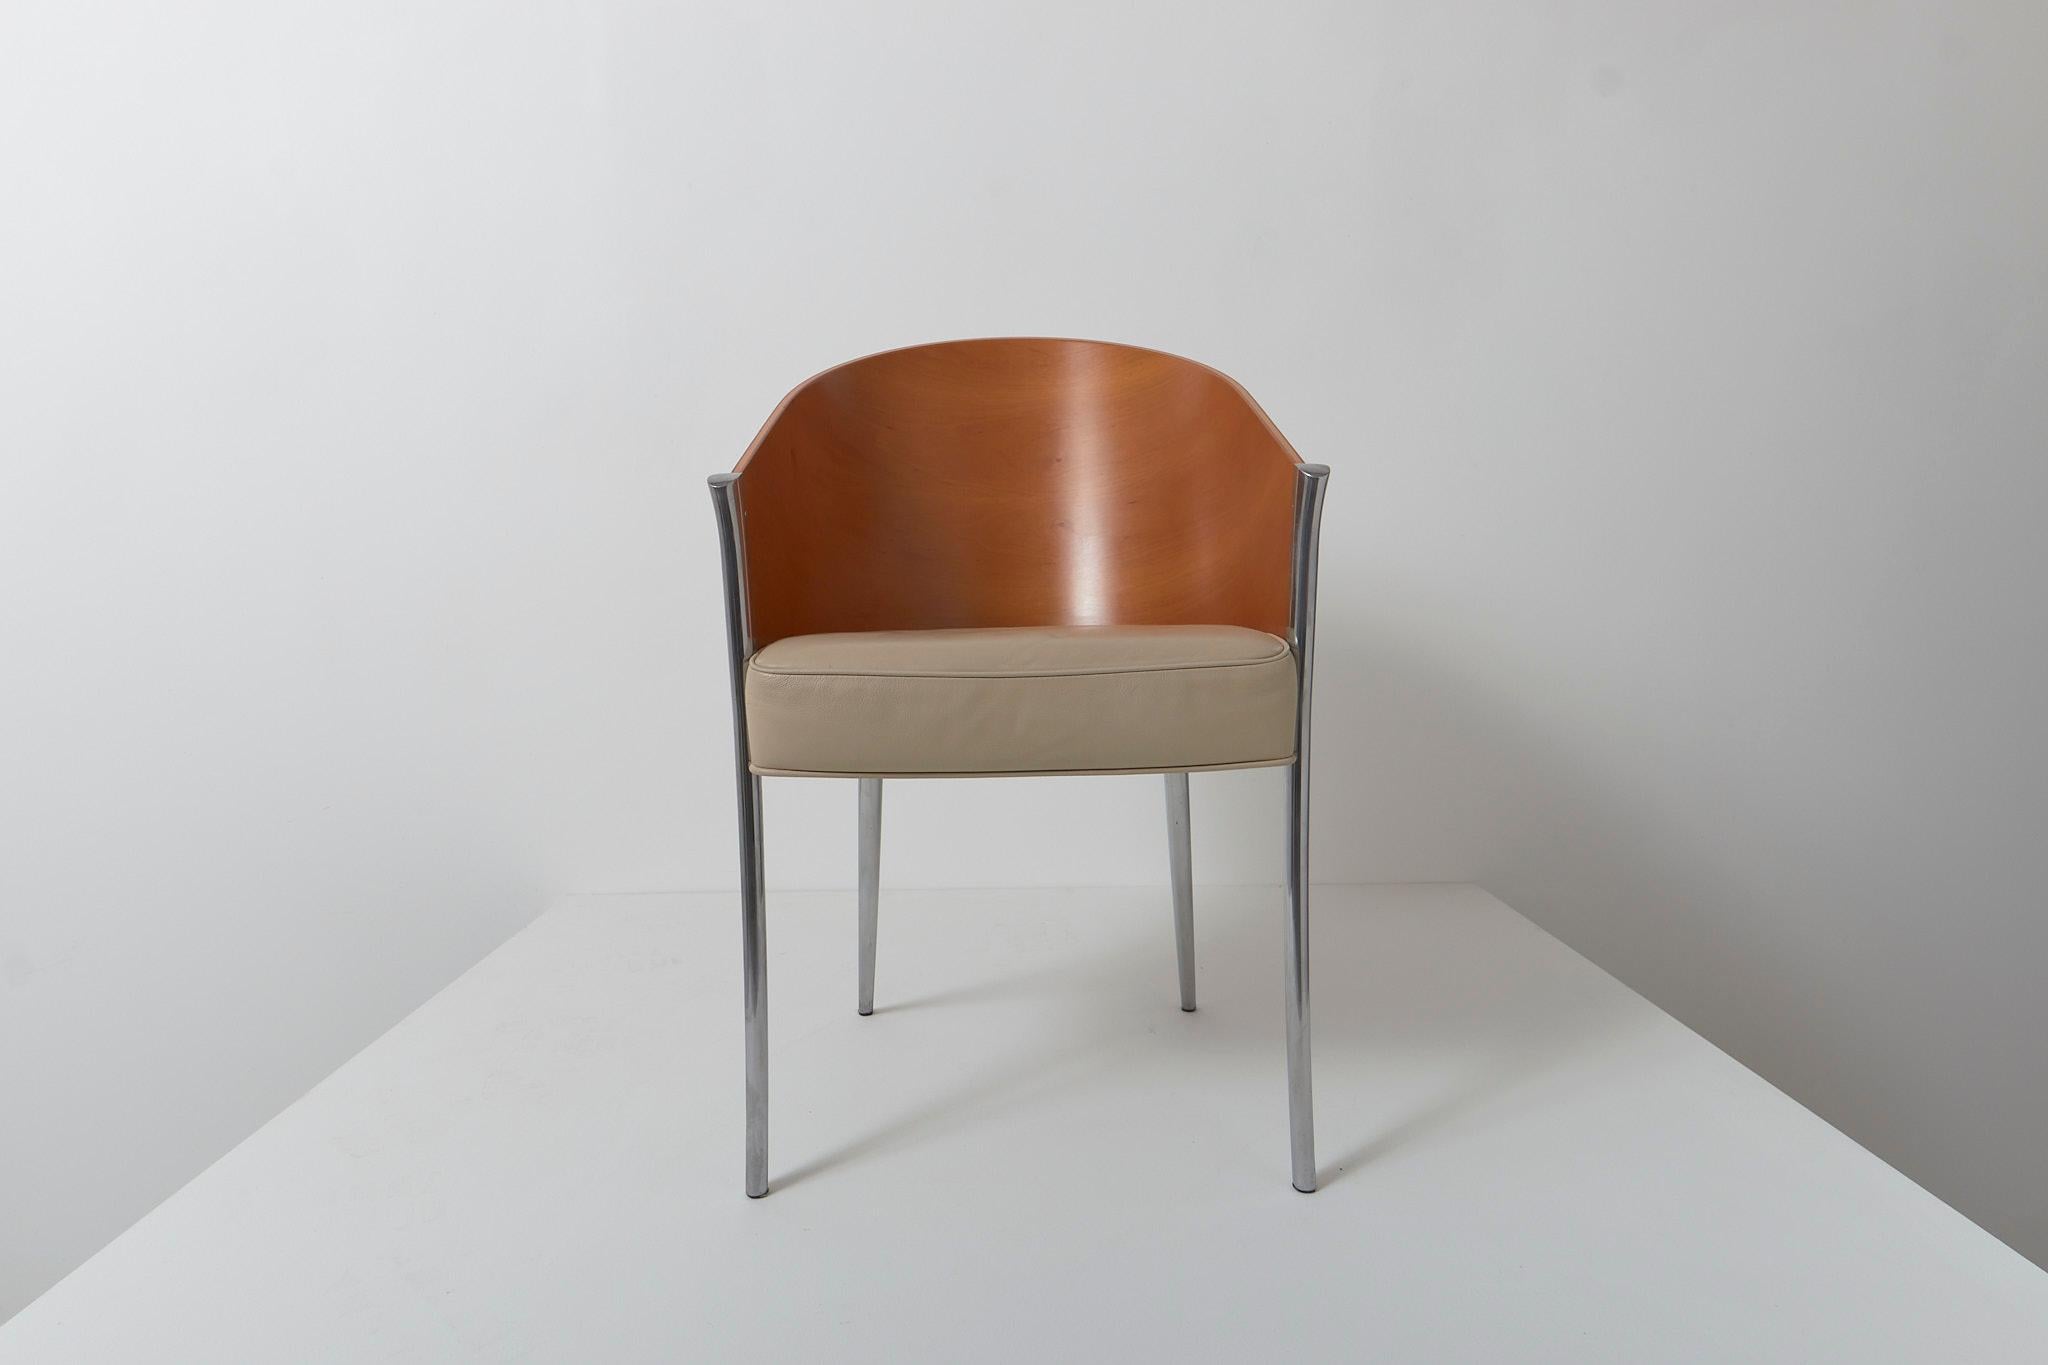 A vintage King Costes chair by Philippe Starck for Aleph, circa 1992. Curved plywood back with aluminium legs and beige leather seat.

The condition is excellent, there are two minor chips to the veneer (pictured).

Dimensions: H80cm W51cm